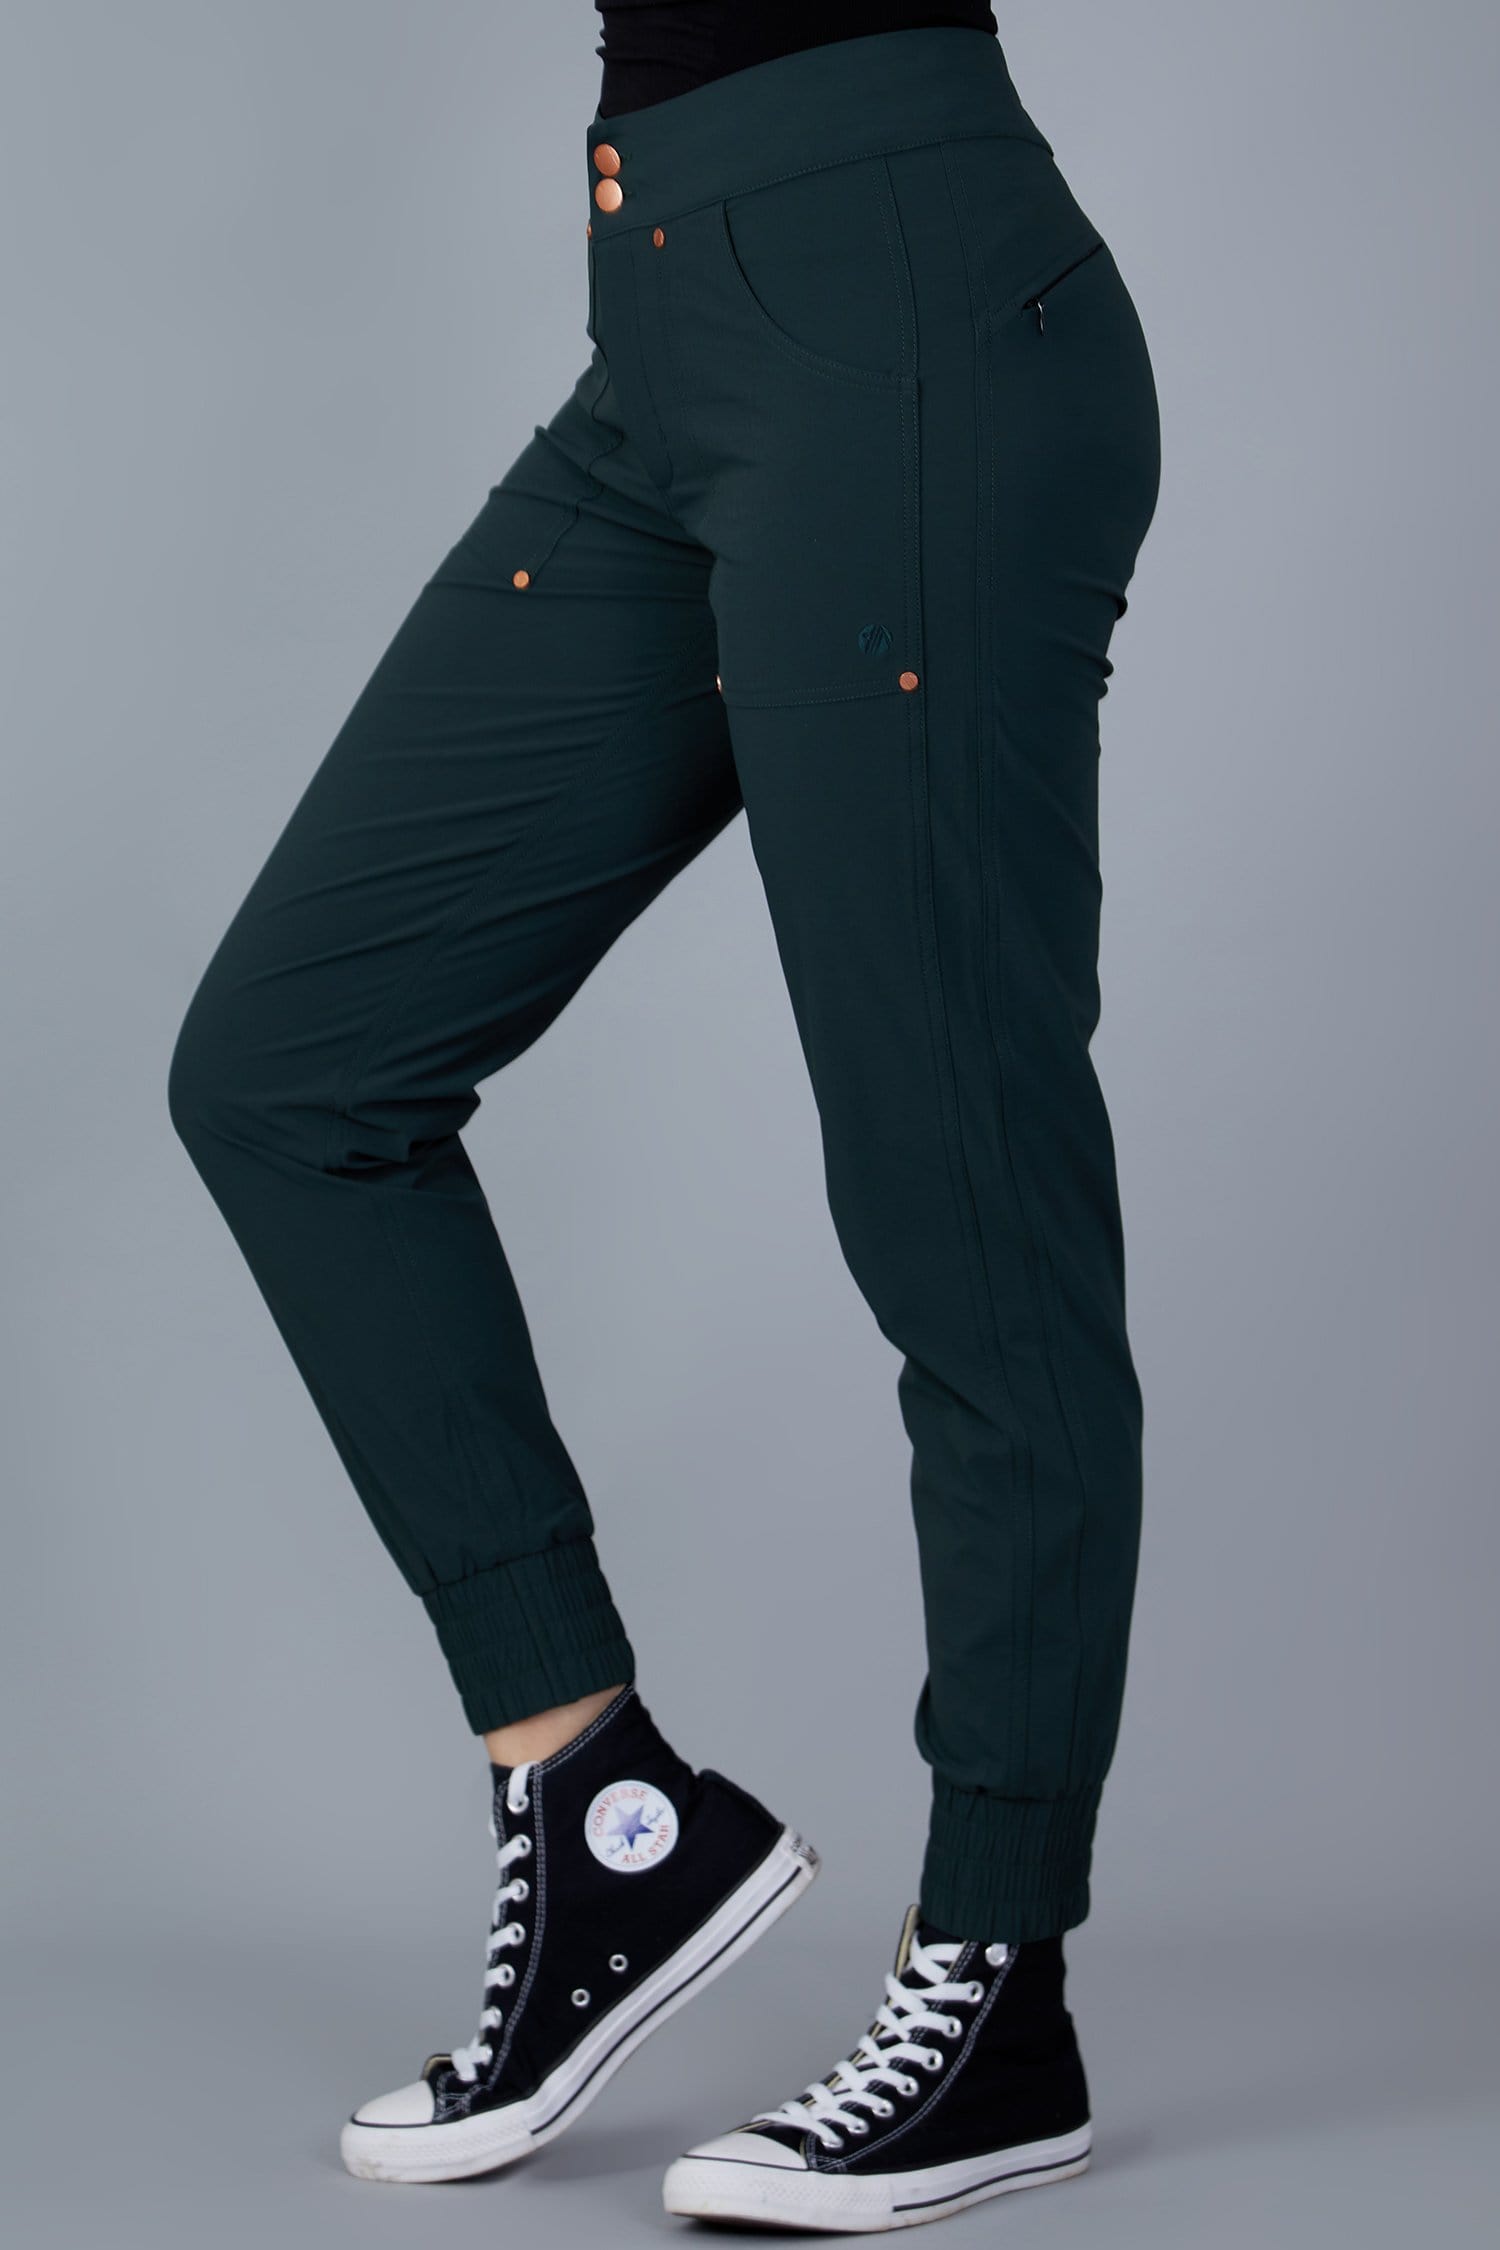 Casual Stroll Pants - Forest Green - 38l / Uk20 - Womens - Acai Outdoorwear